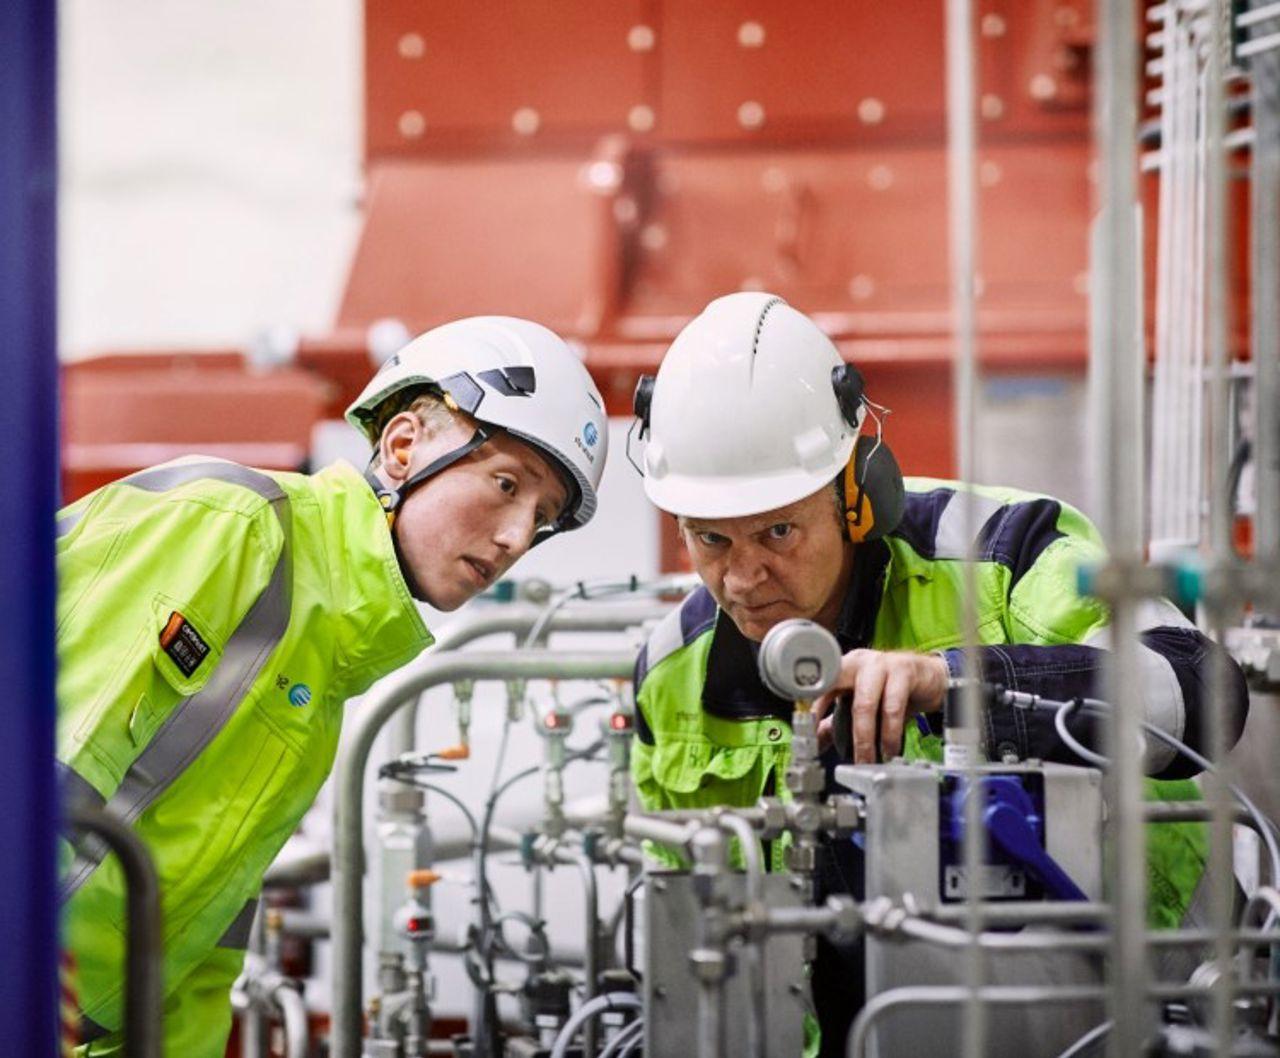 Two Statkraft employees working at Ringedalen power plant